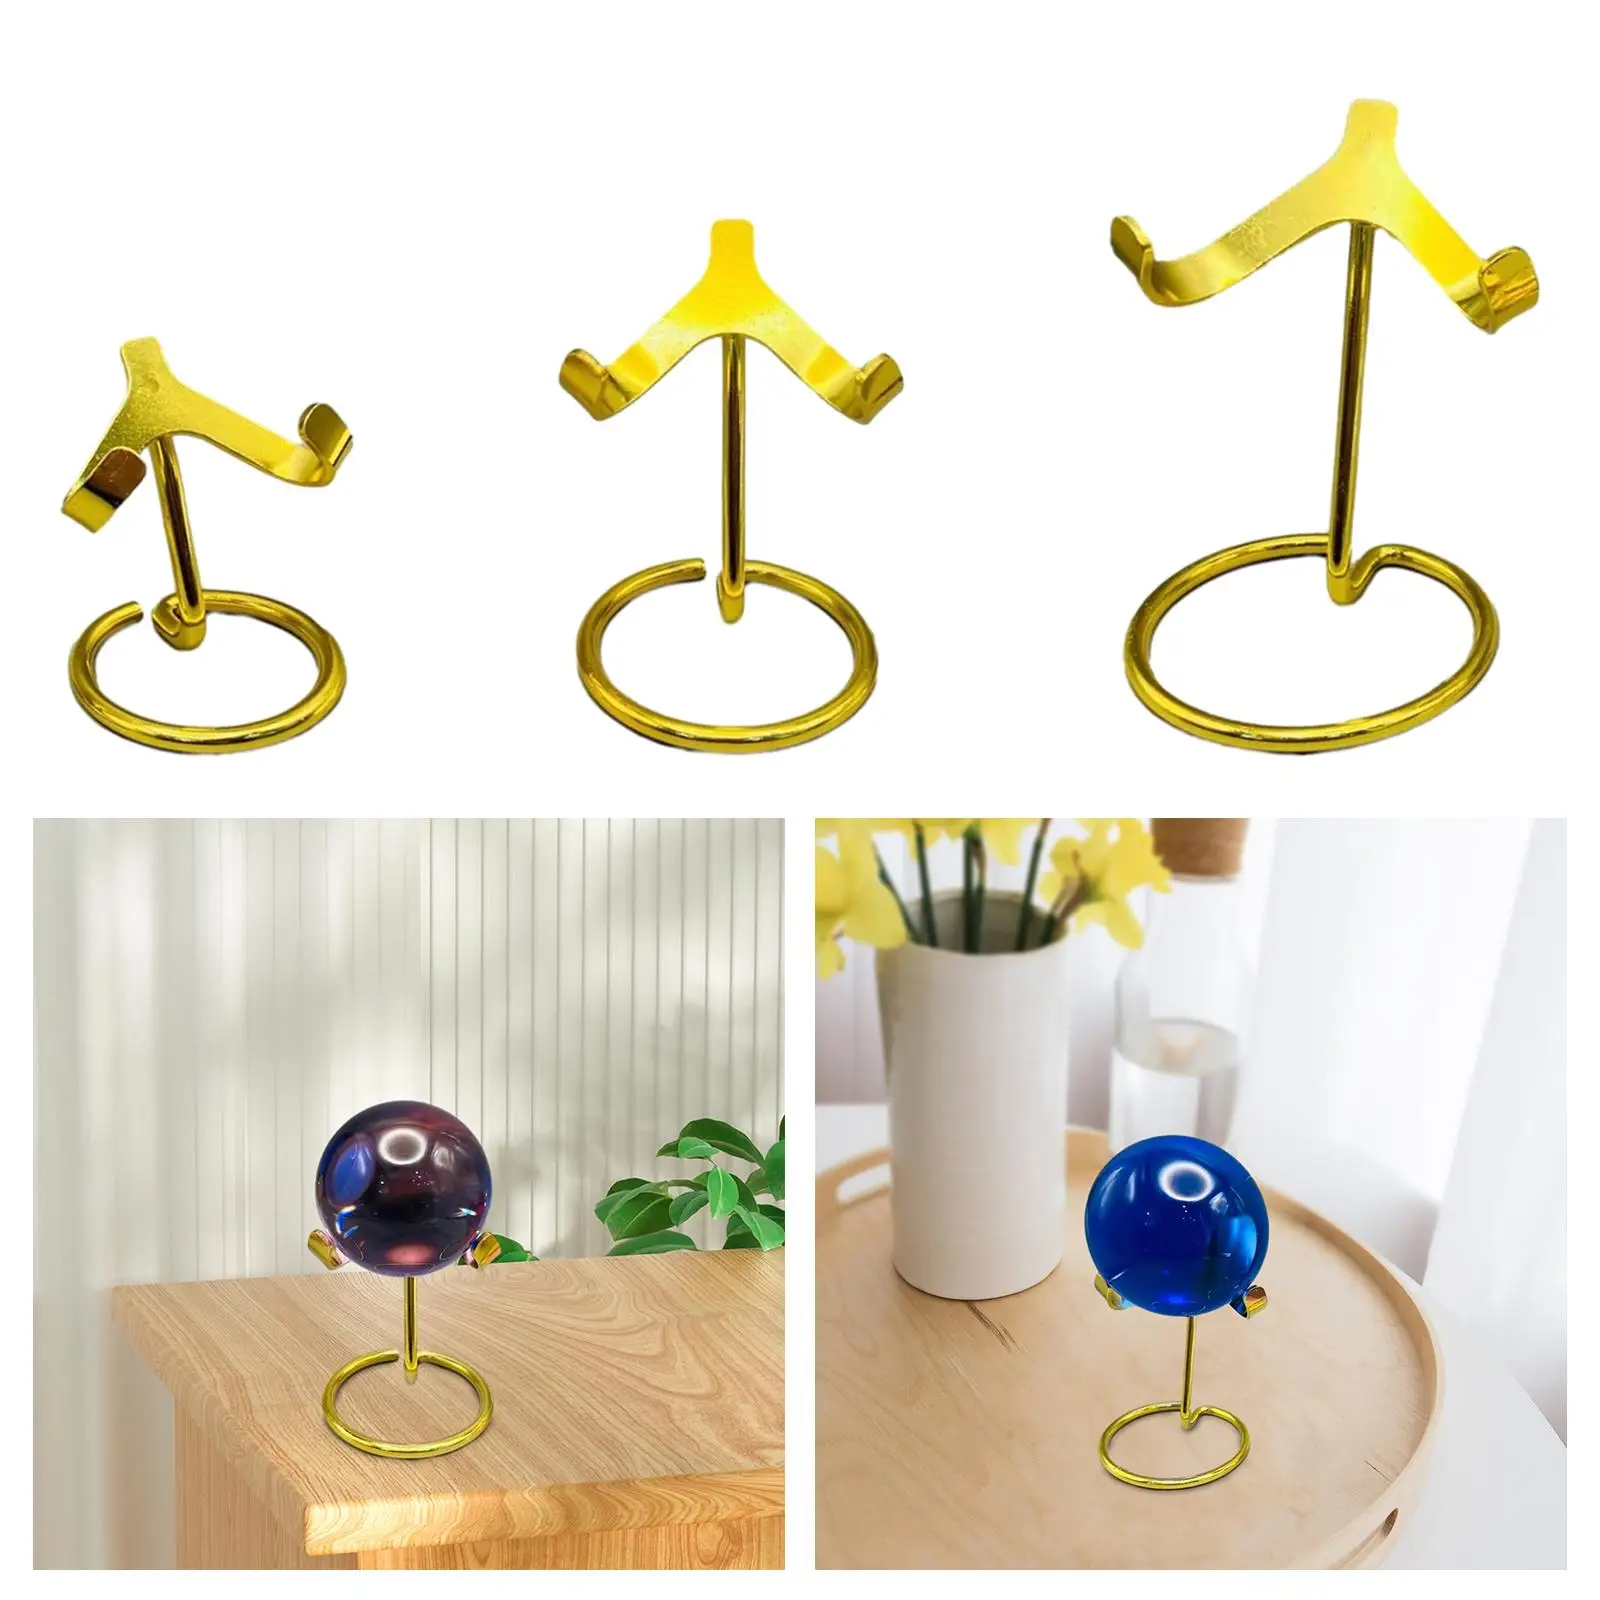 Crystal Ball Storage Rack Multipurpose Sculpture Portable Stable Sphere Stand Desktop Display Ball Holder for Collections Stones